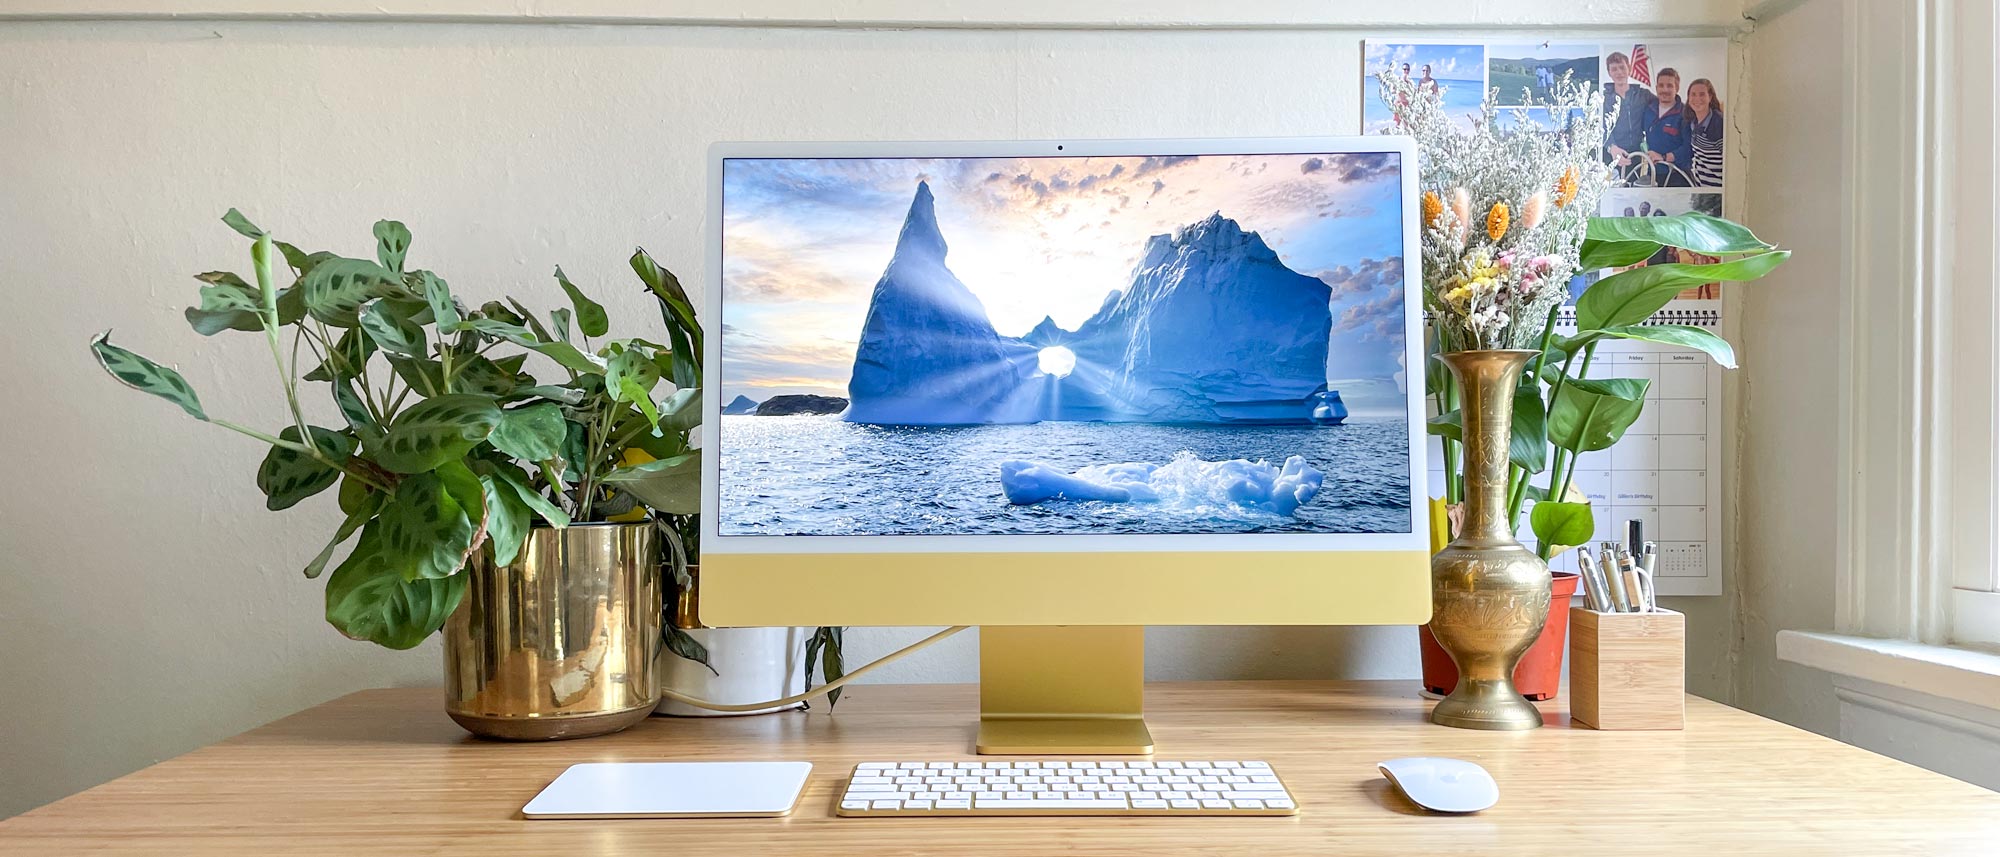 Dios Plaga excusa Apple iMac 2021 review (24-inch) | Tom's Guide